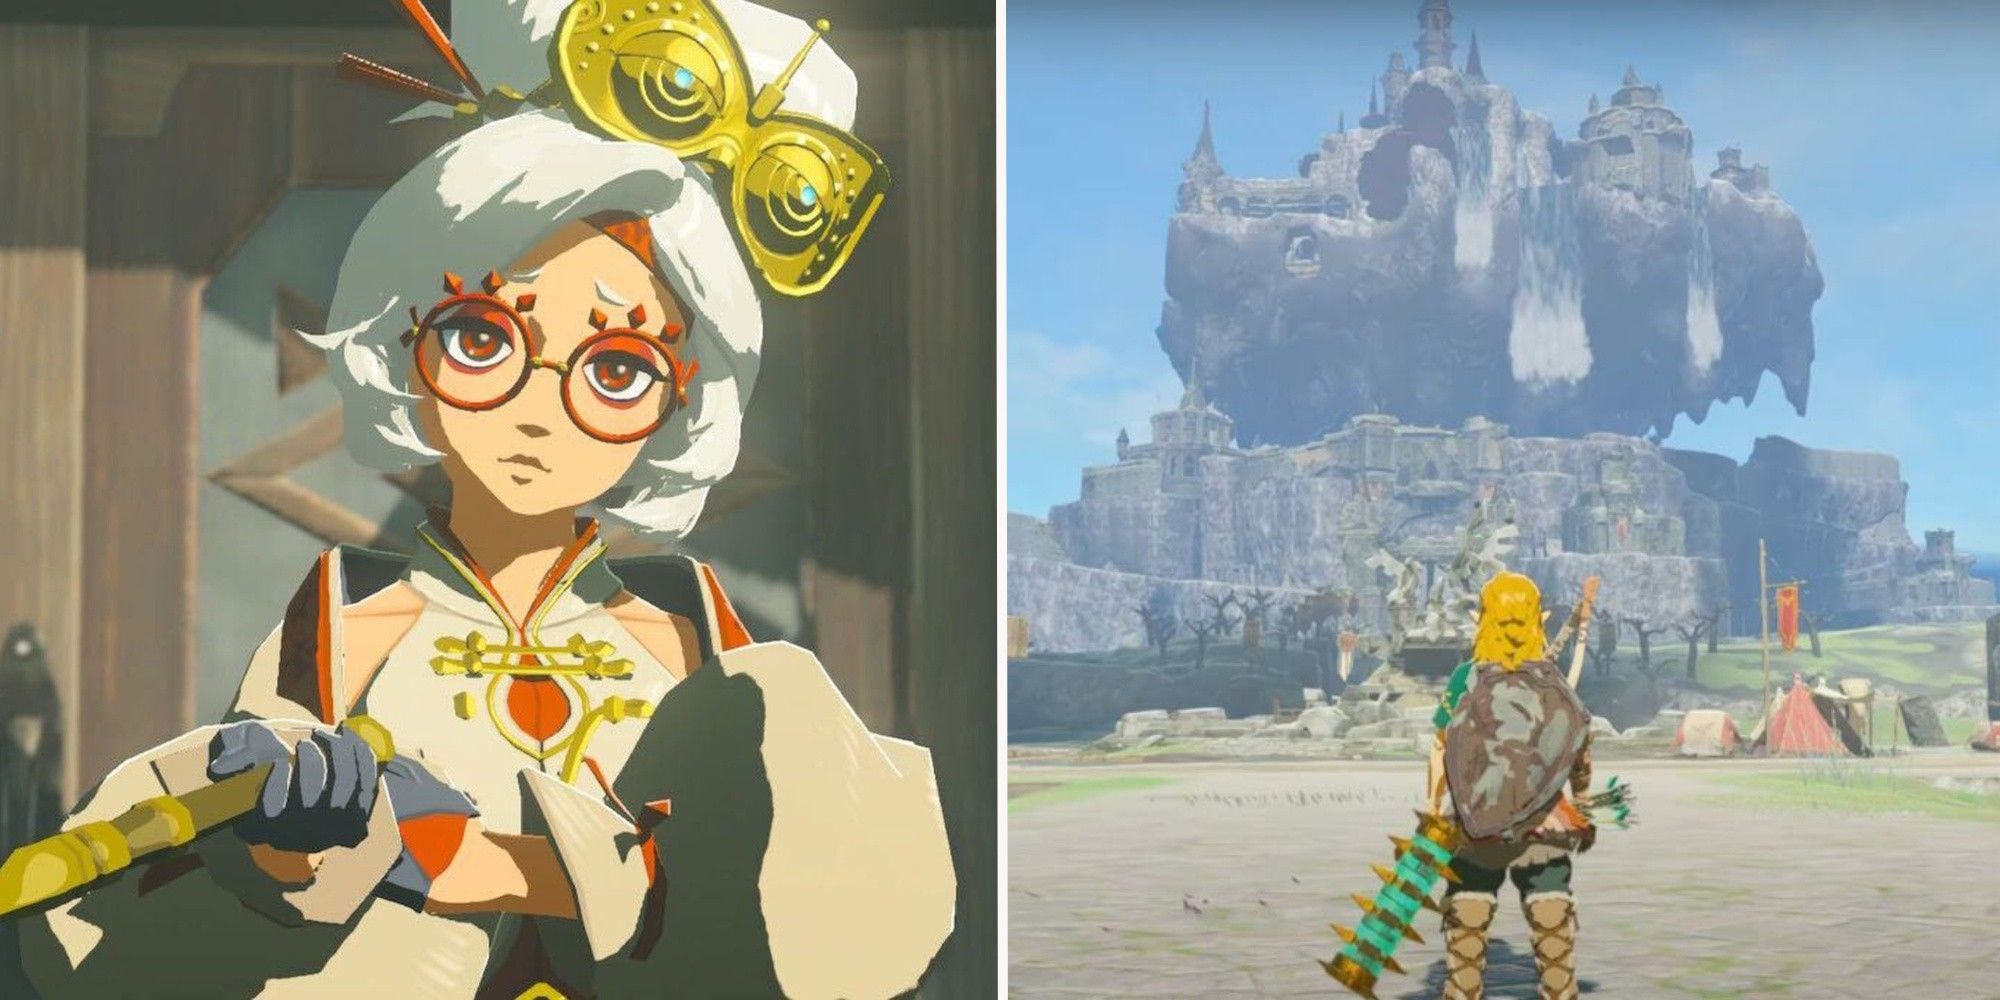 Purah staring forwards, and Link looking on at Hyrule castle In The Legend of Zelda: Tears of the Kingdom the video game